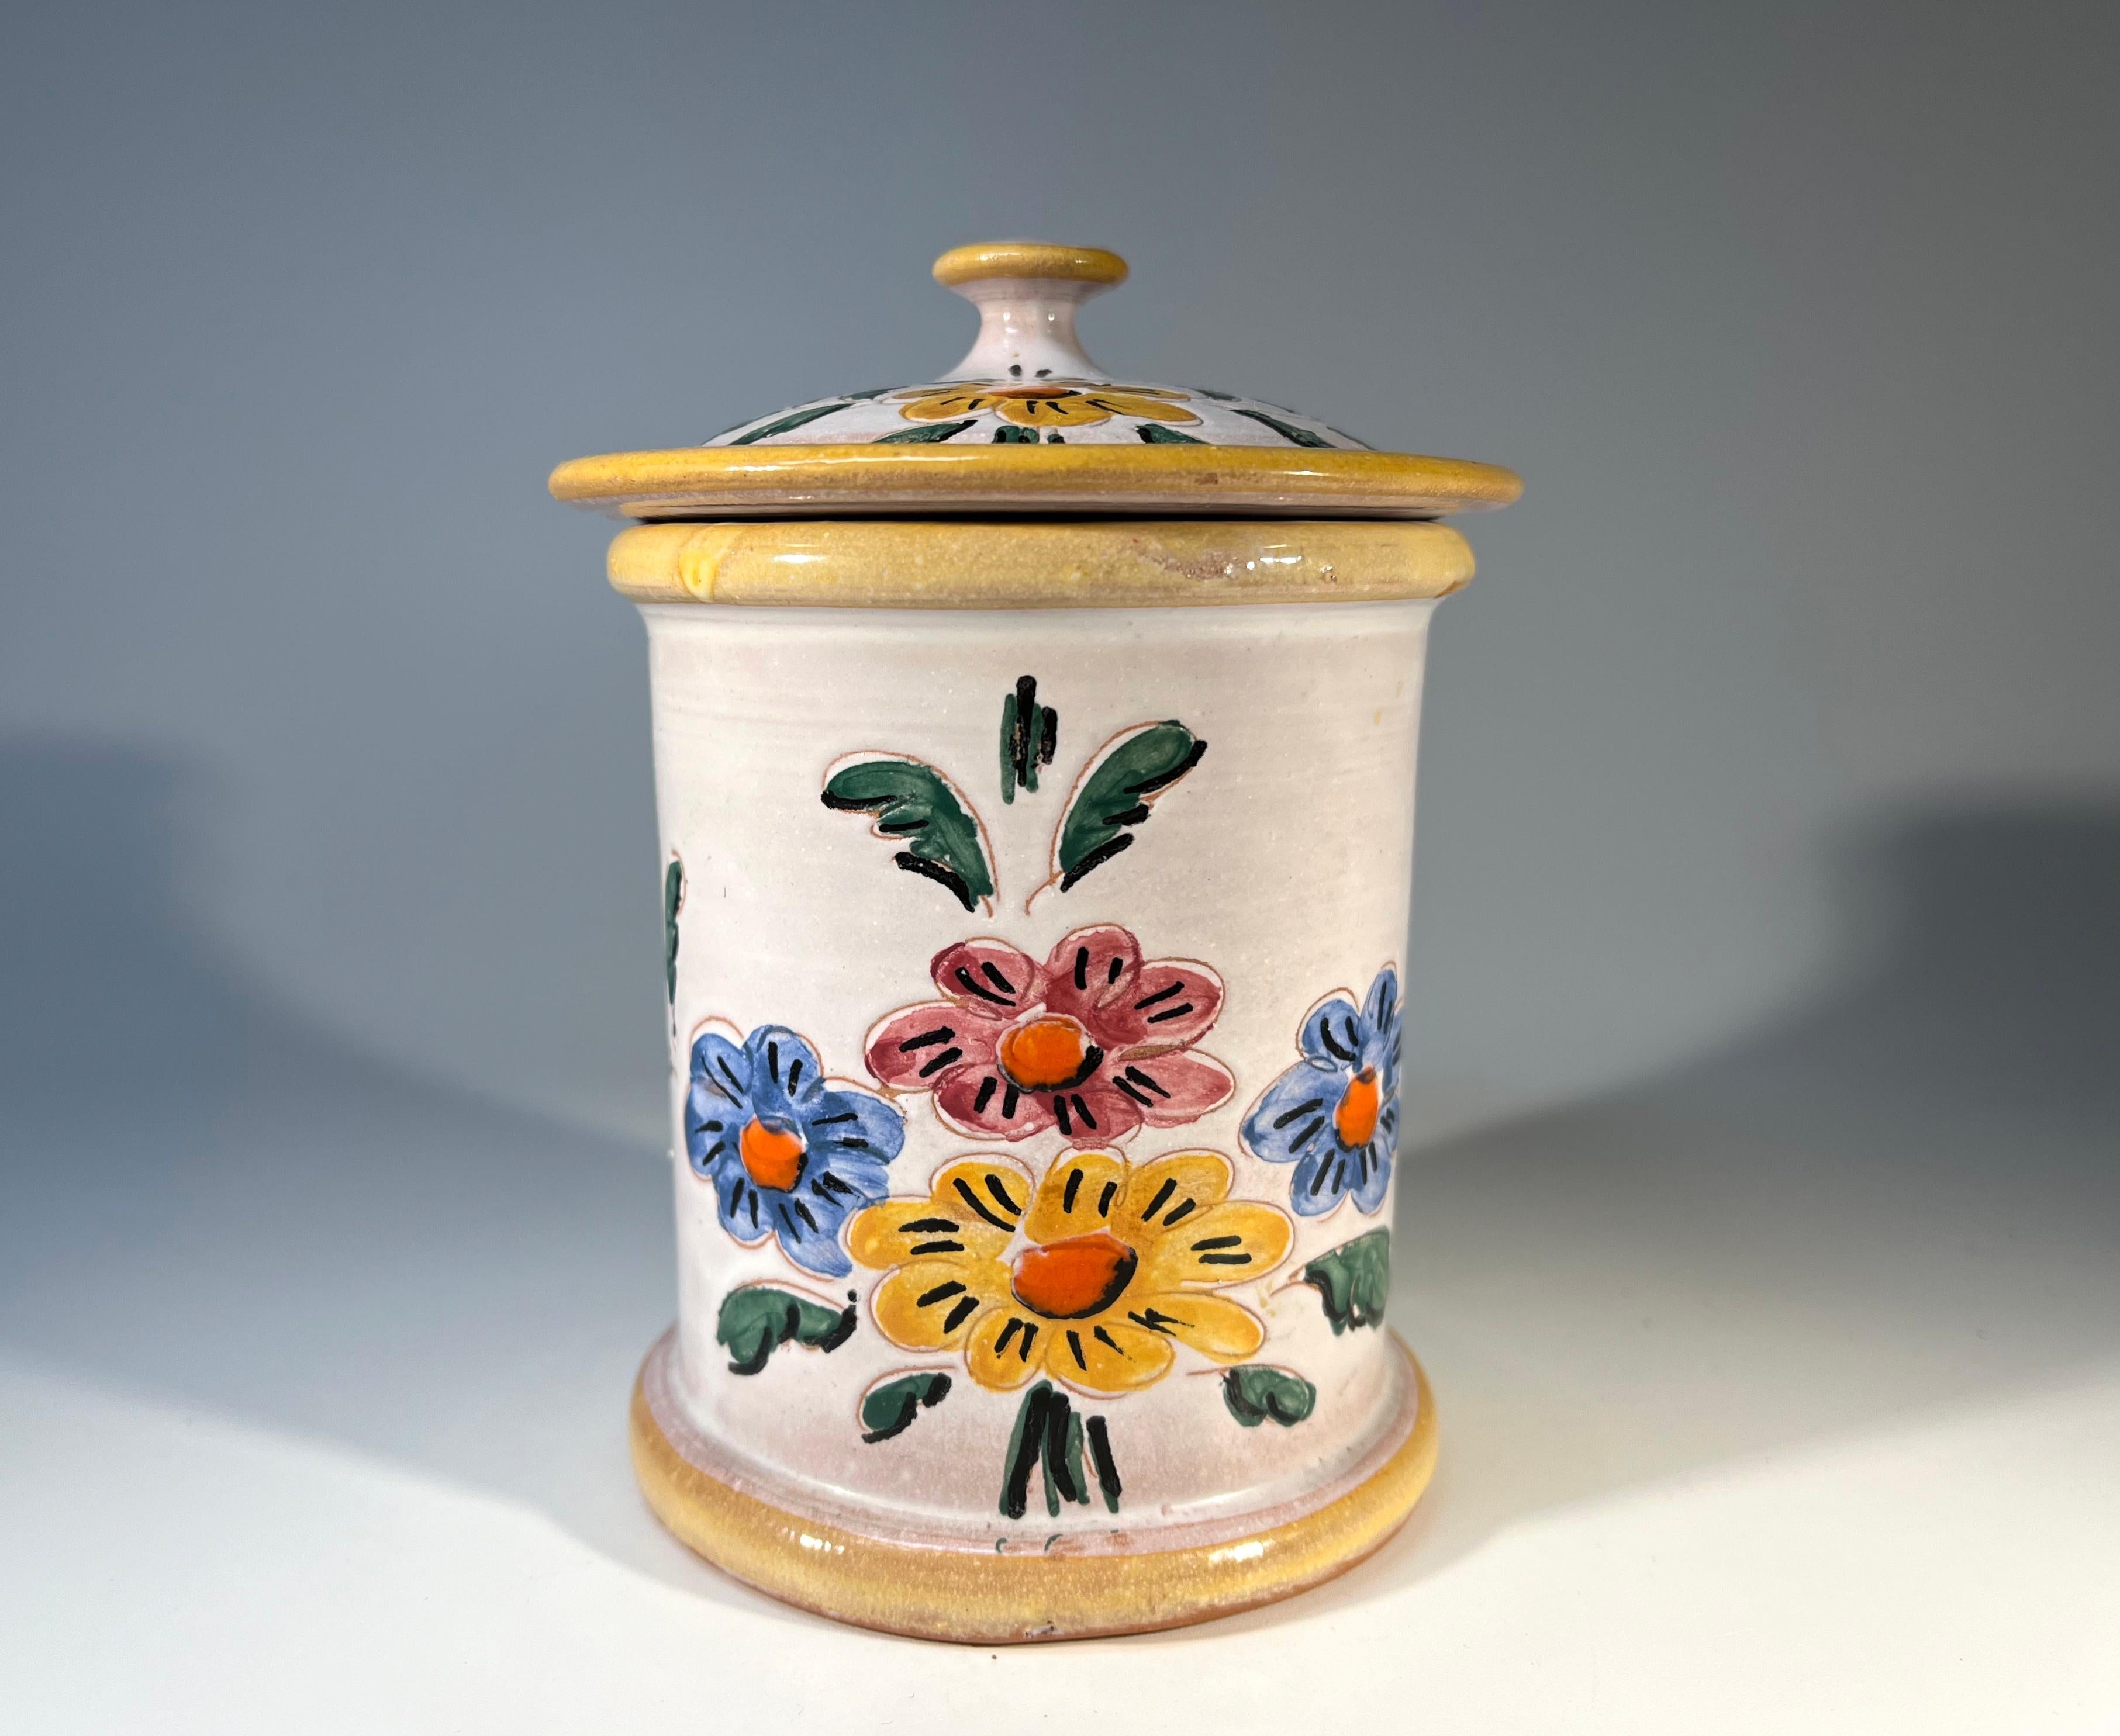 Delightful French provincial ceramic tobacco jar from Vallauris, France.
Cheerfully hand painted with country-style  flowers and etched Tabac on lid
Stamped Aegitna Vallauris on base
Circa Mid-20th Century
Height 4.5 inch, Diameter 3.5 inch
In good